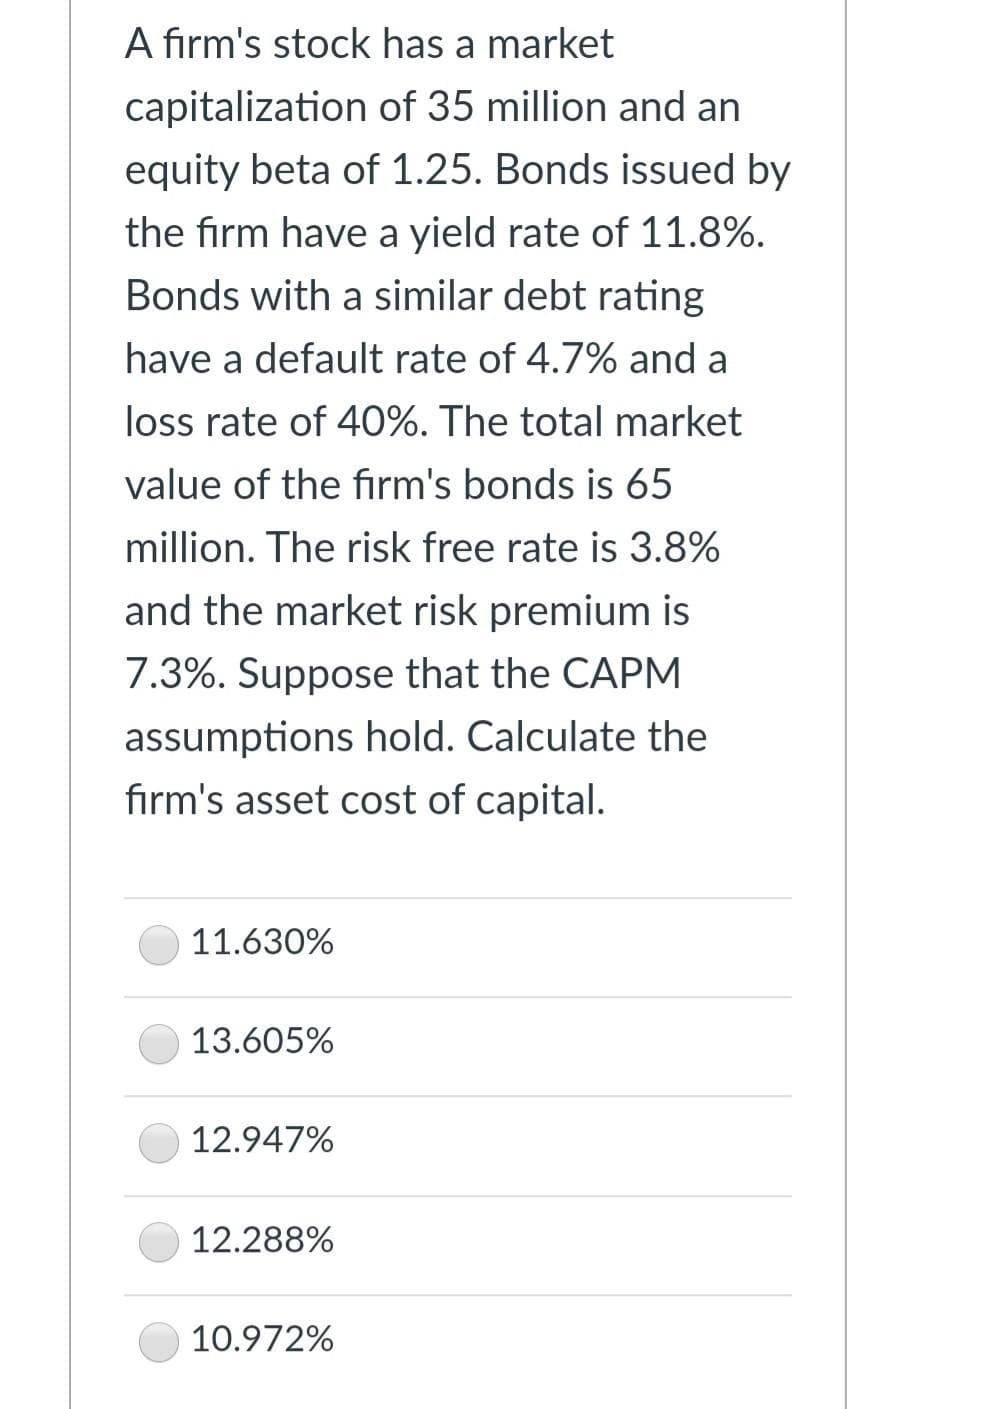 A firm's stock has a market
capitalization of 35 million and an
equity beta of 1.25. Bonds issued by
the firm have a yield rate of 11.8%.
Bonds with a similar debt rating
have a default rate of 4.7% and a
loss rate of 40%. The total market
value of the firm's bonds is 65
million. The risk free rate is 3.8%
and the market risk premium is
7.3%. Suppose that the CAPM
assumptions hold. Calculate the
firm's asset cost of capital.
11.630%
13.605%
12.947%
12.288%
10.972%
